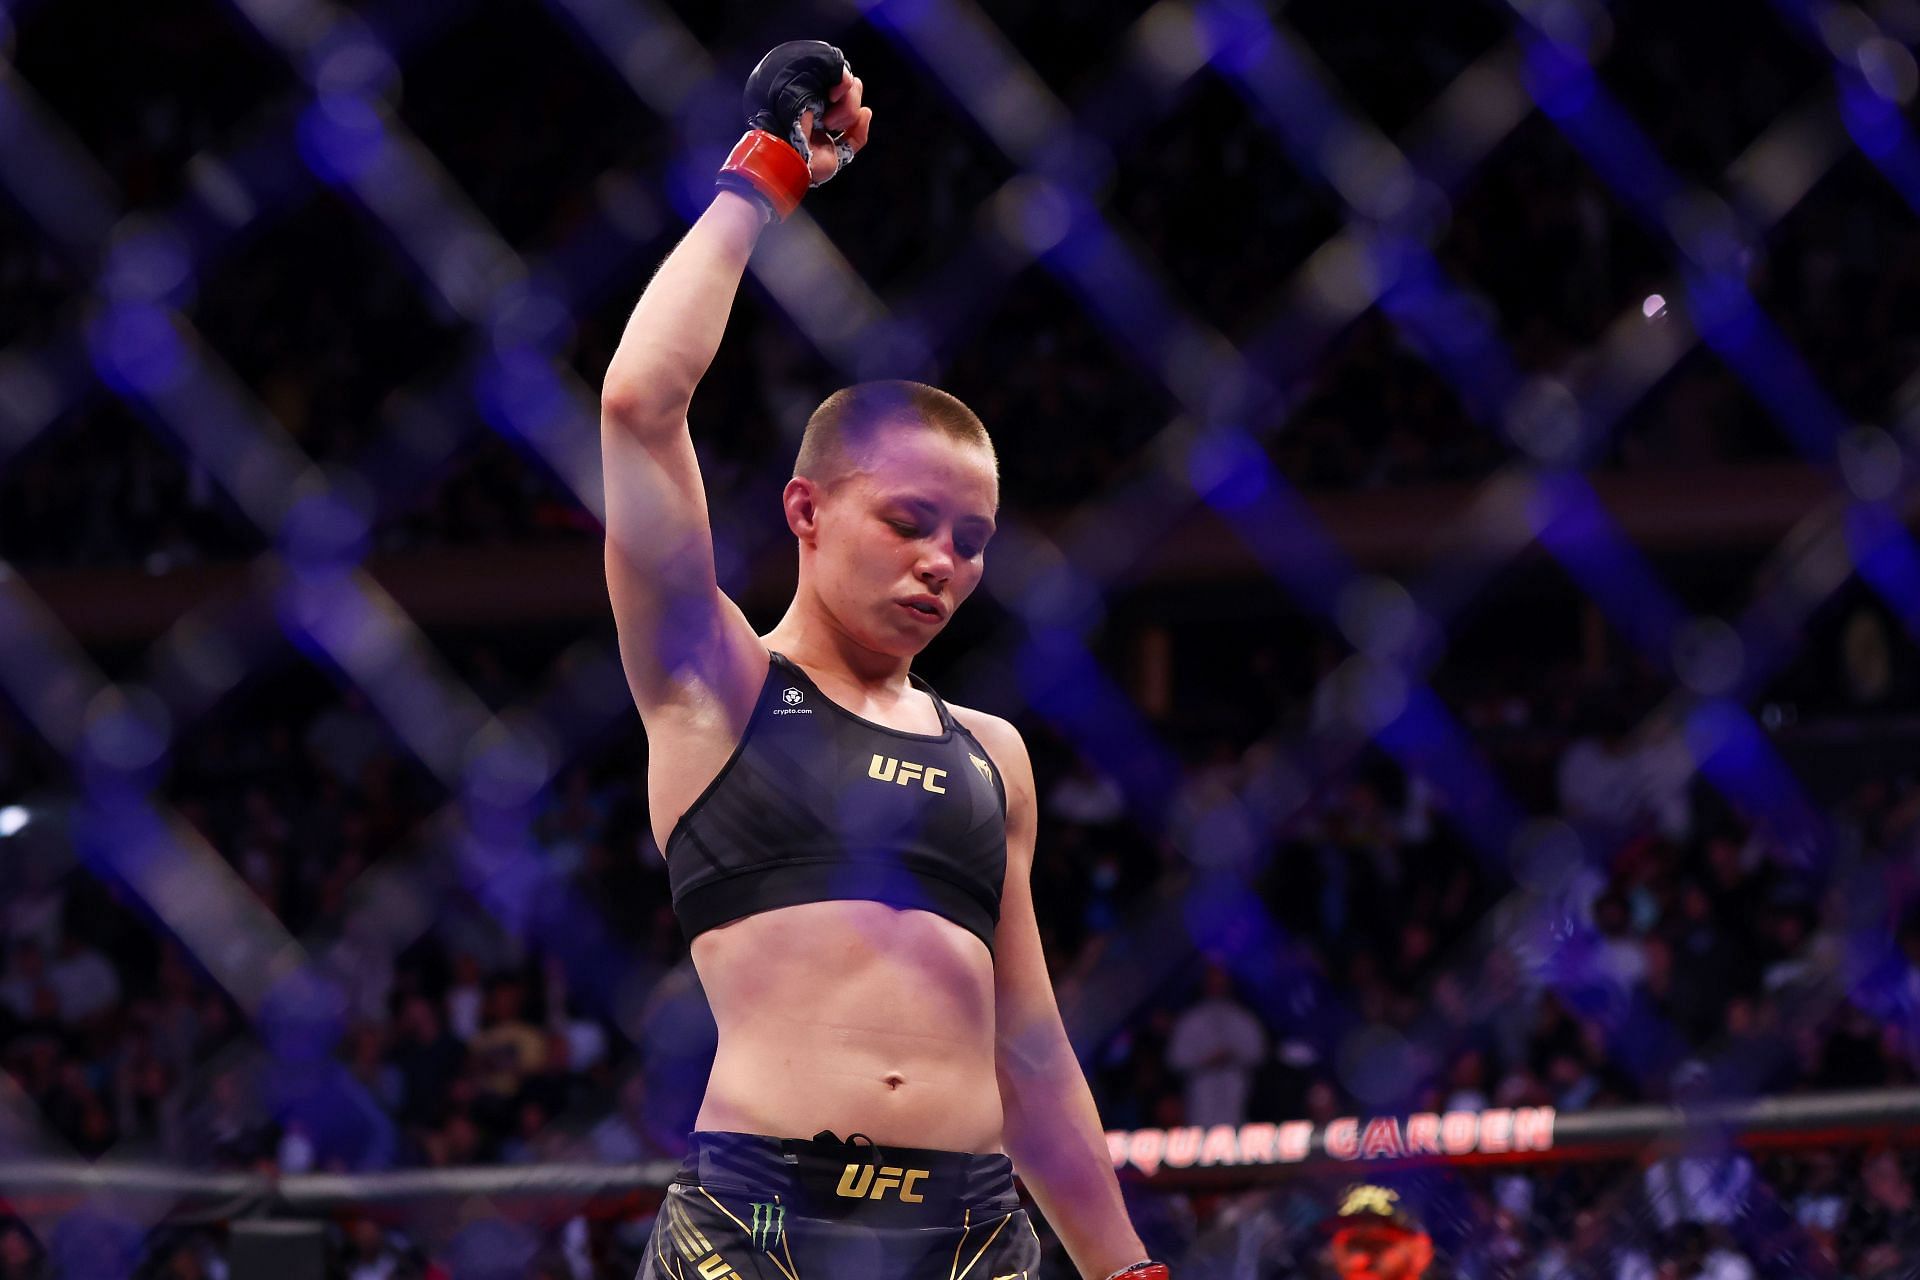 Namajunas was the runner-up on the 20th season of The Ultimate Fighter